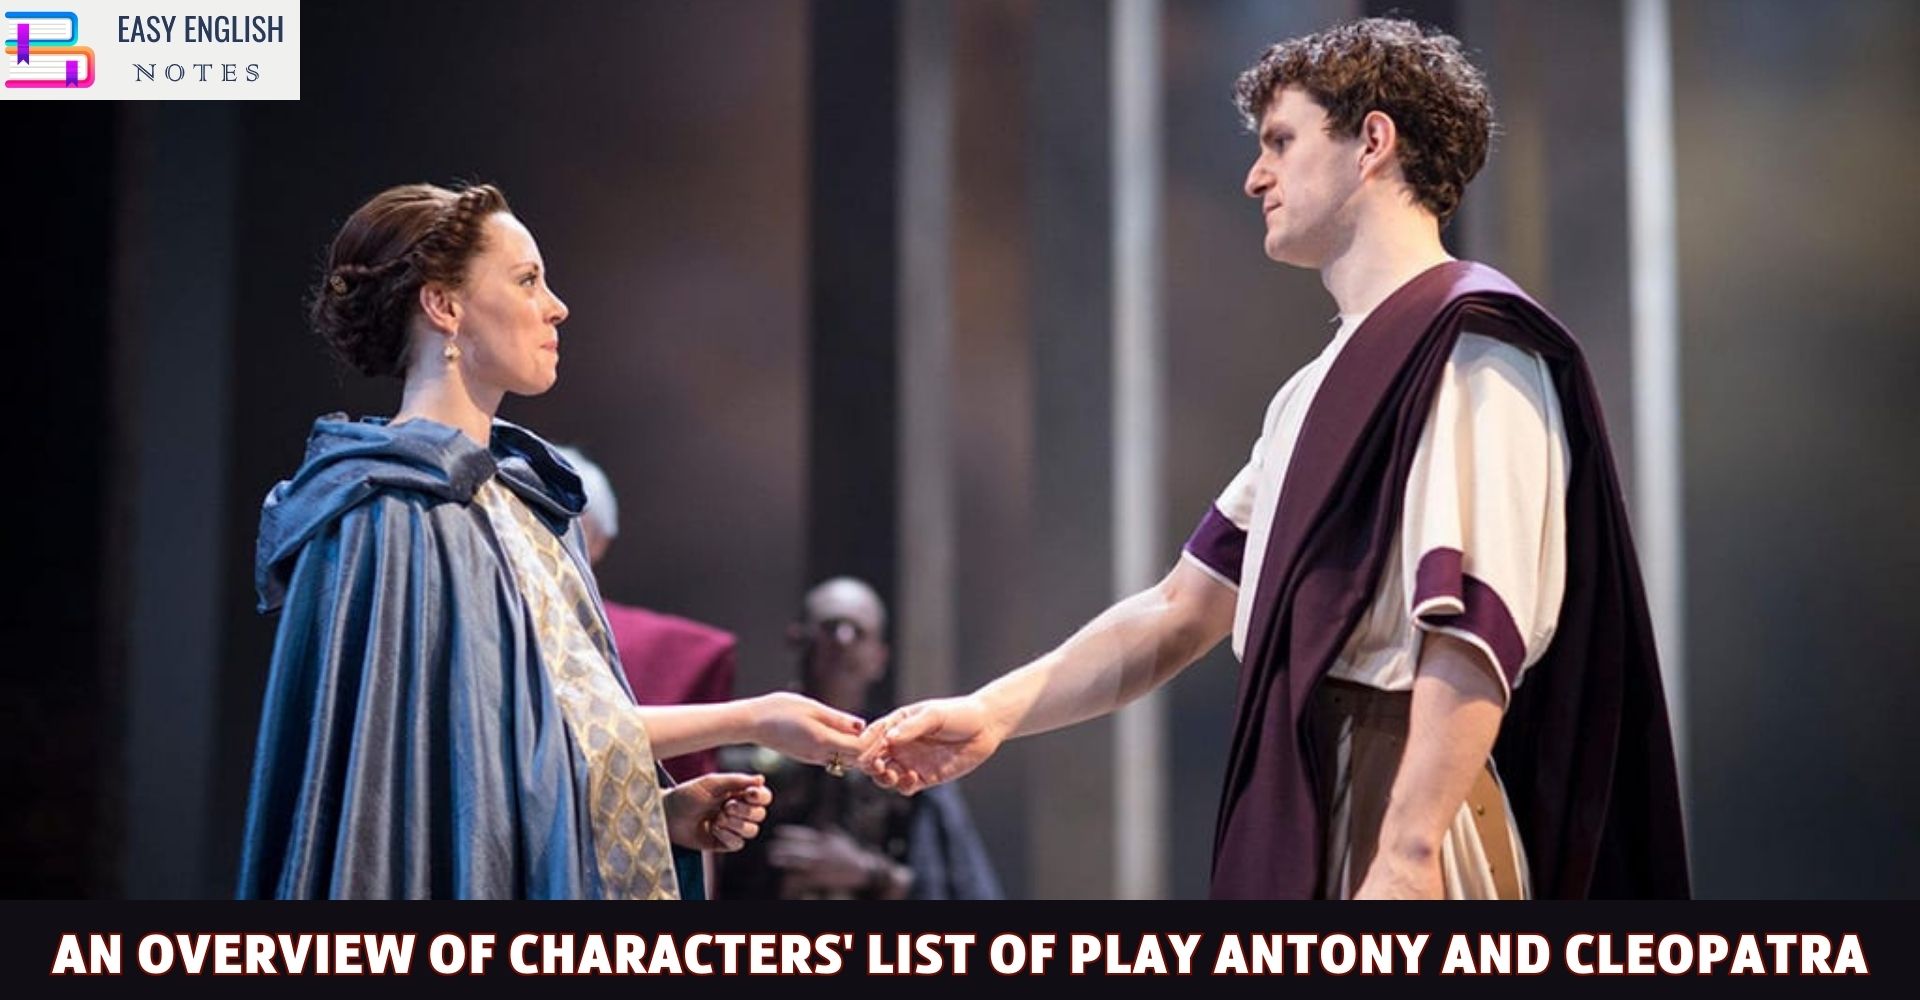 An overview of characters' list of Play Antony and Cleopatra